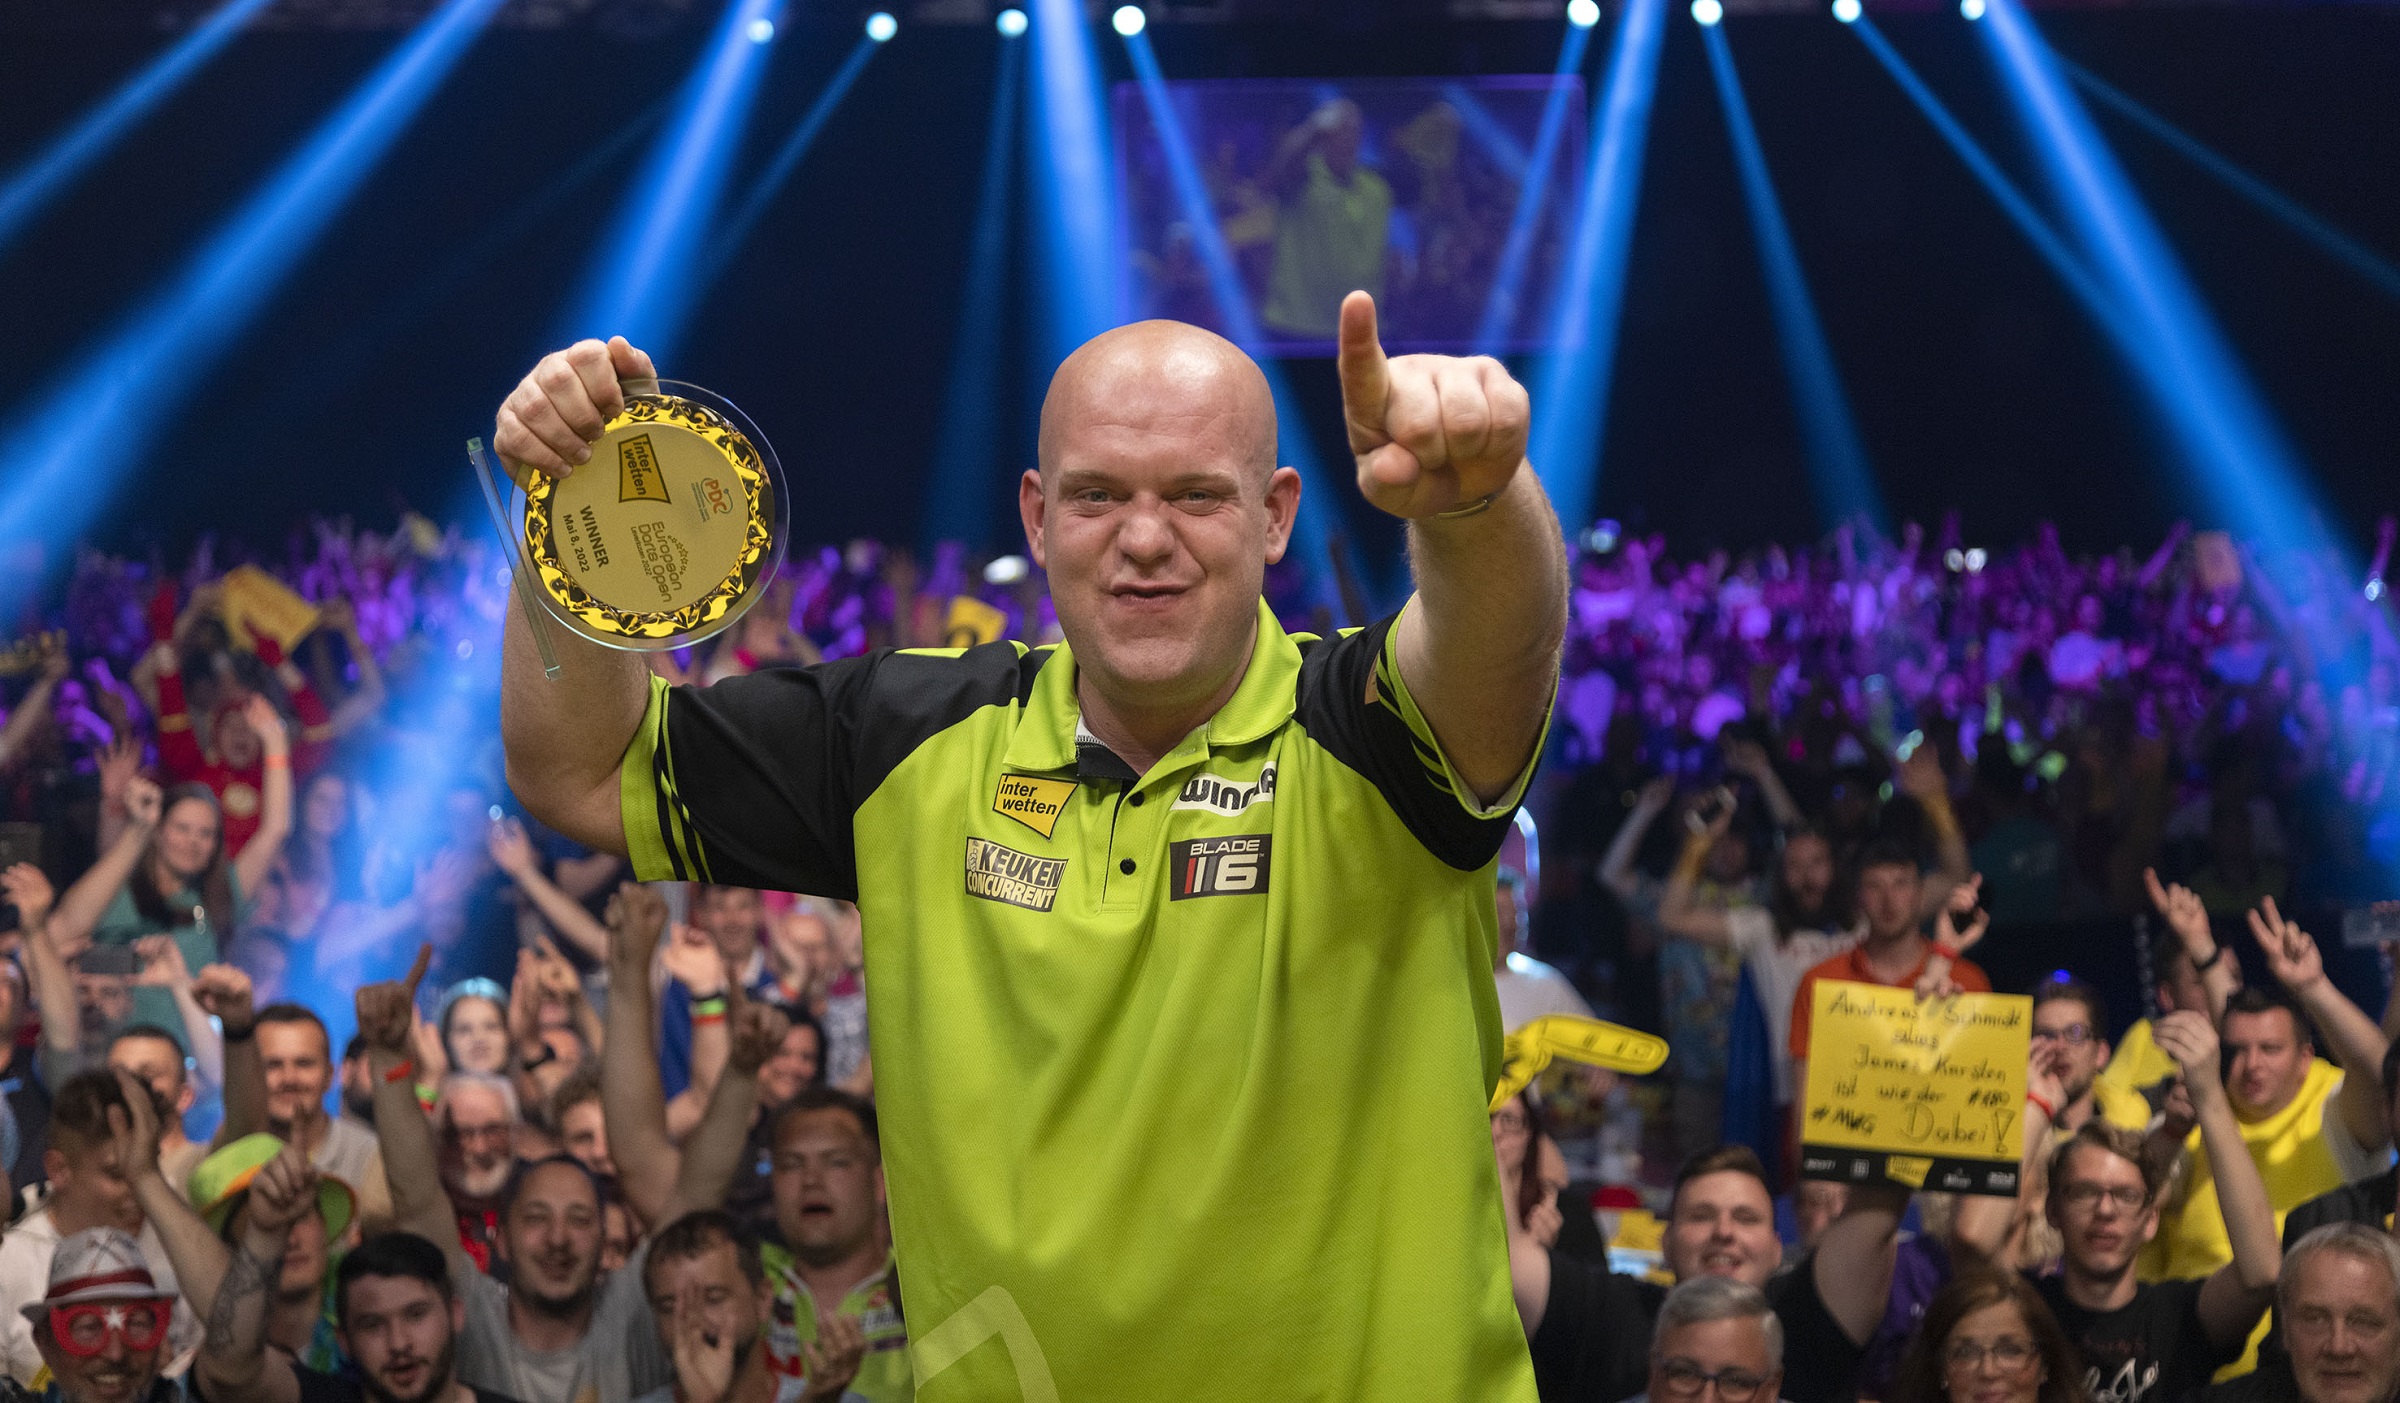 Viaplay to show PDC European Tour in UK and Europe from 2023 PDC